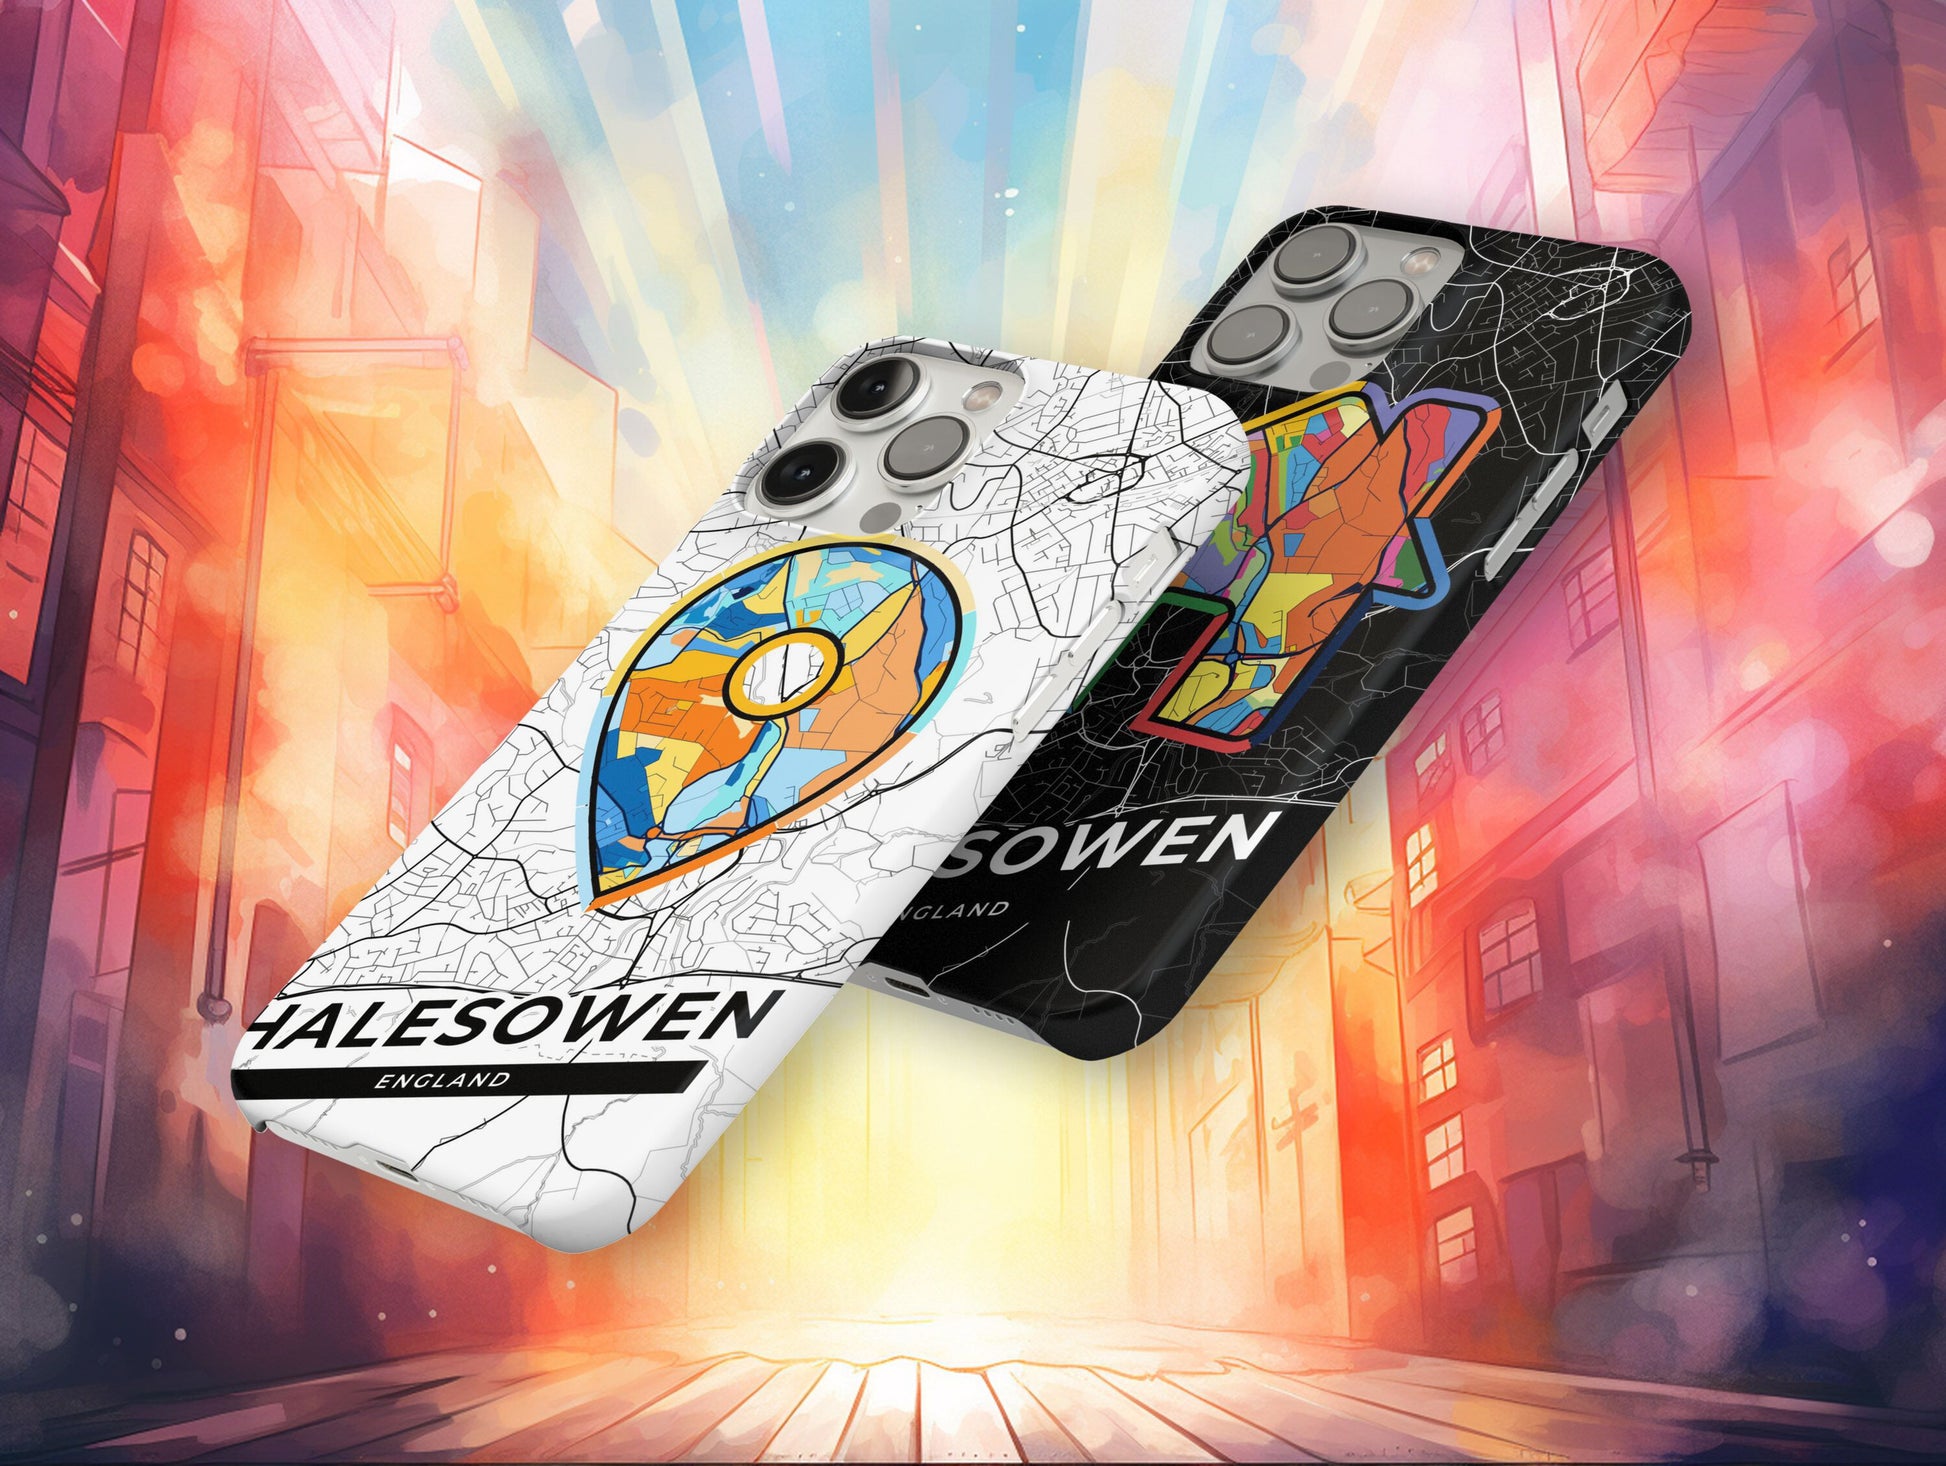 Halesowen England slim phone case with colorful icon. Birthday, wedding or housewarming gift. Couple match cases.